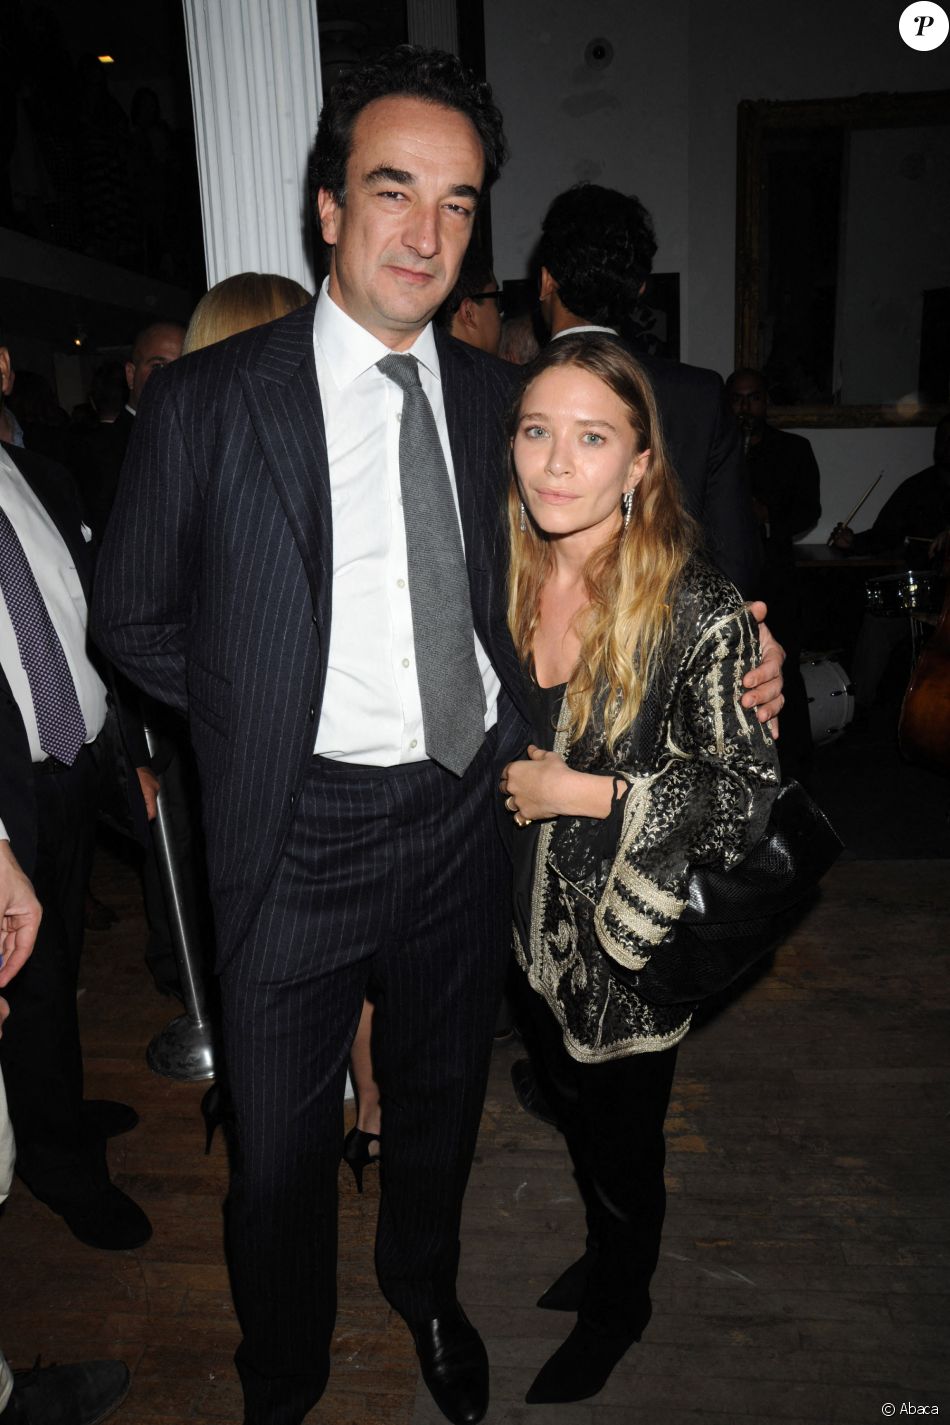 https://static1.purepeople.com/articles/7/39/01/07/@/5609588-mary-kate-olsen-et-olivier-sarkozy-a-new-950x0-3.jpg